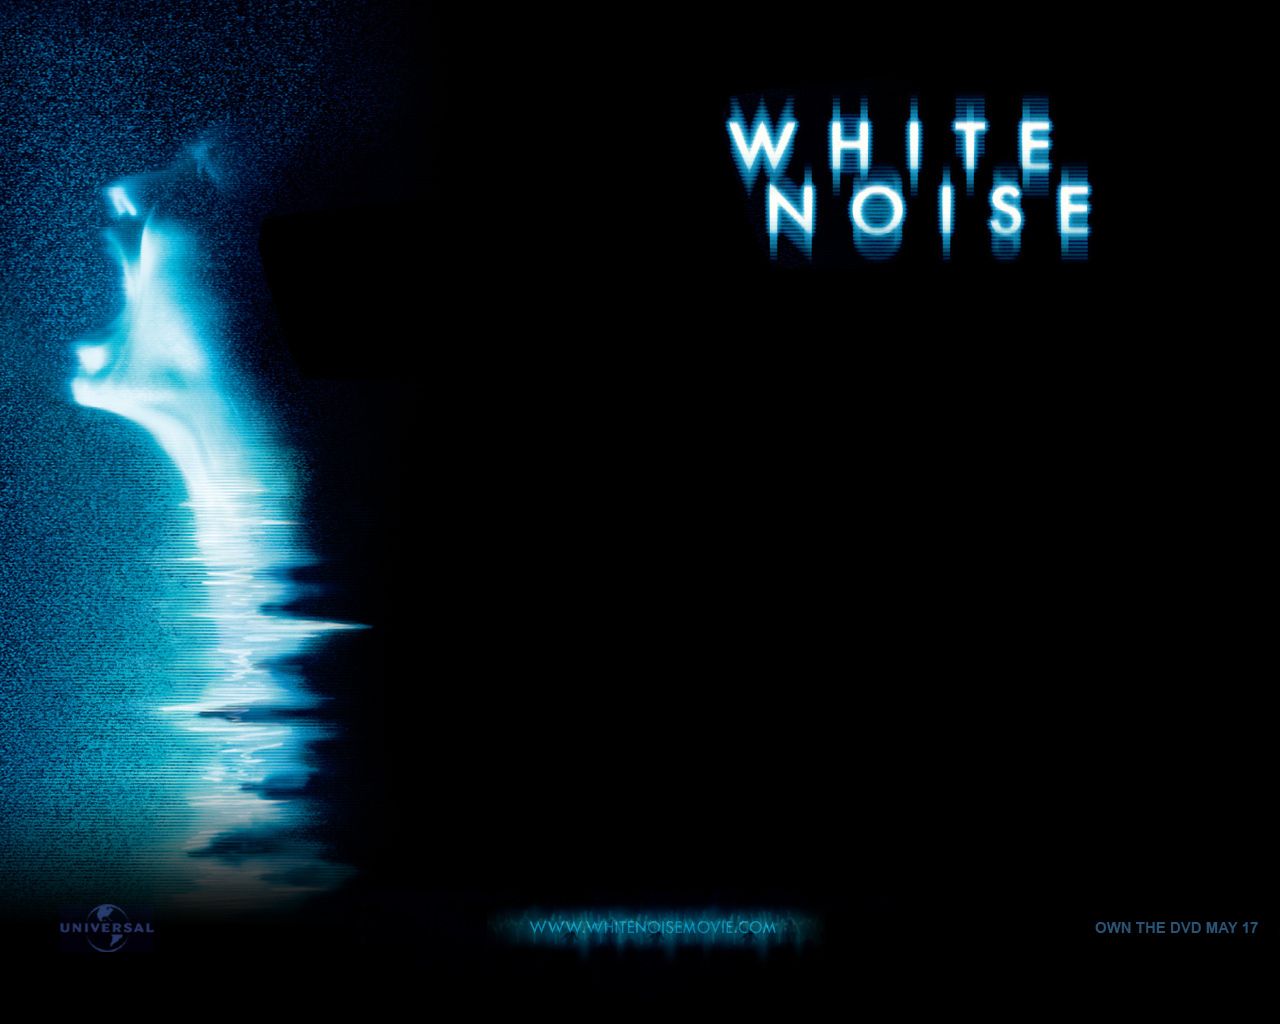 Horror Movies Wallpaper: White Noise. White noise, Horror movies, Movies